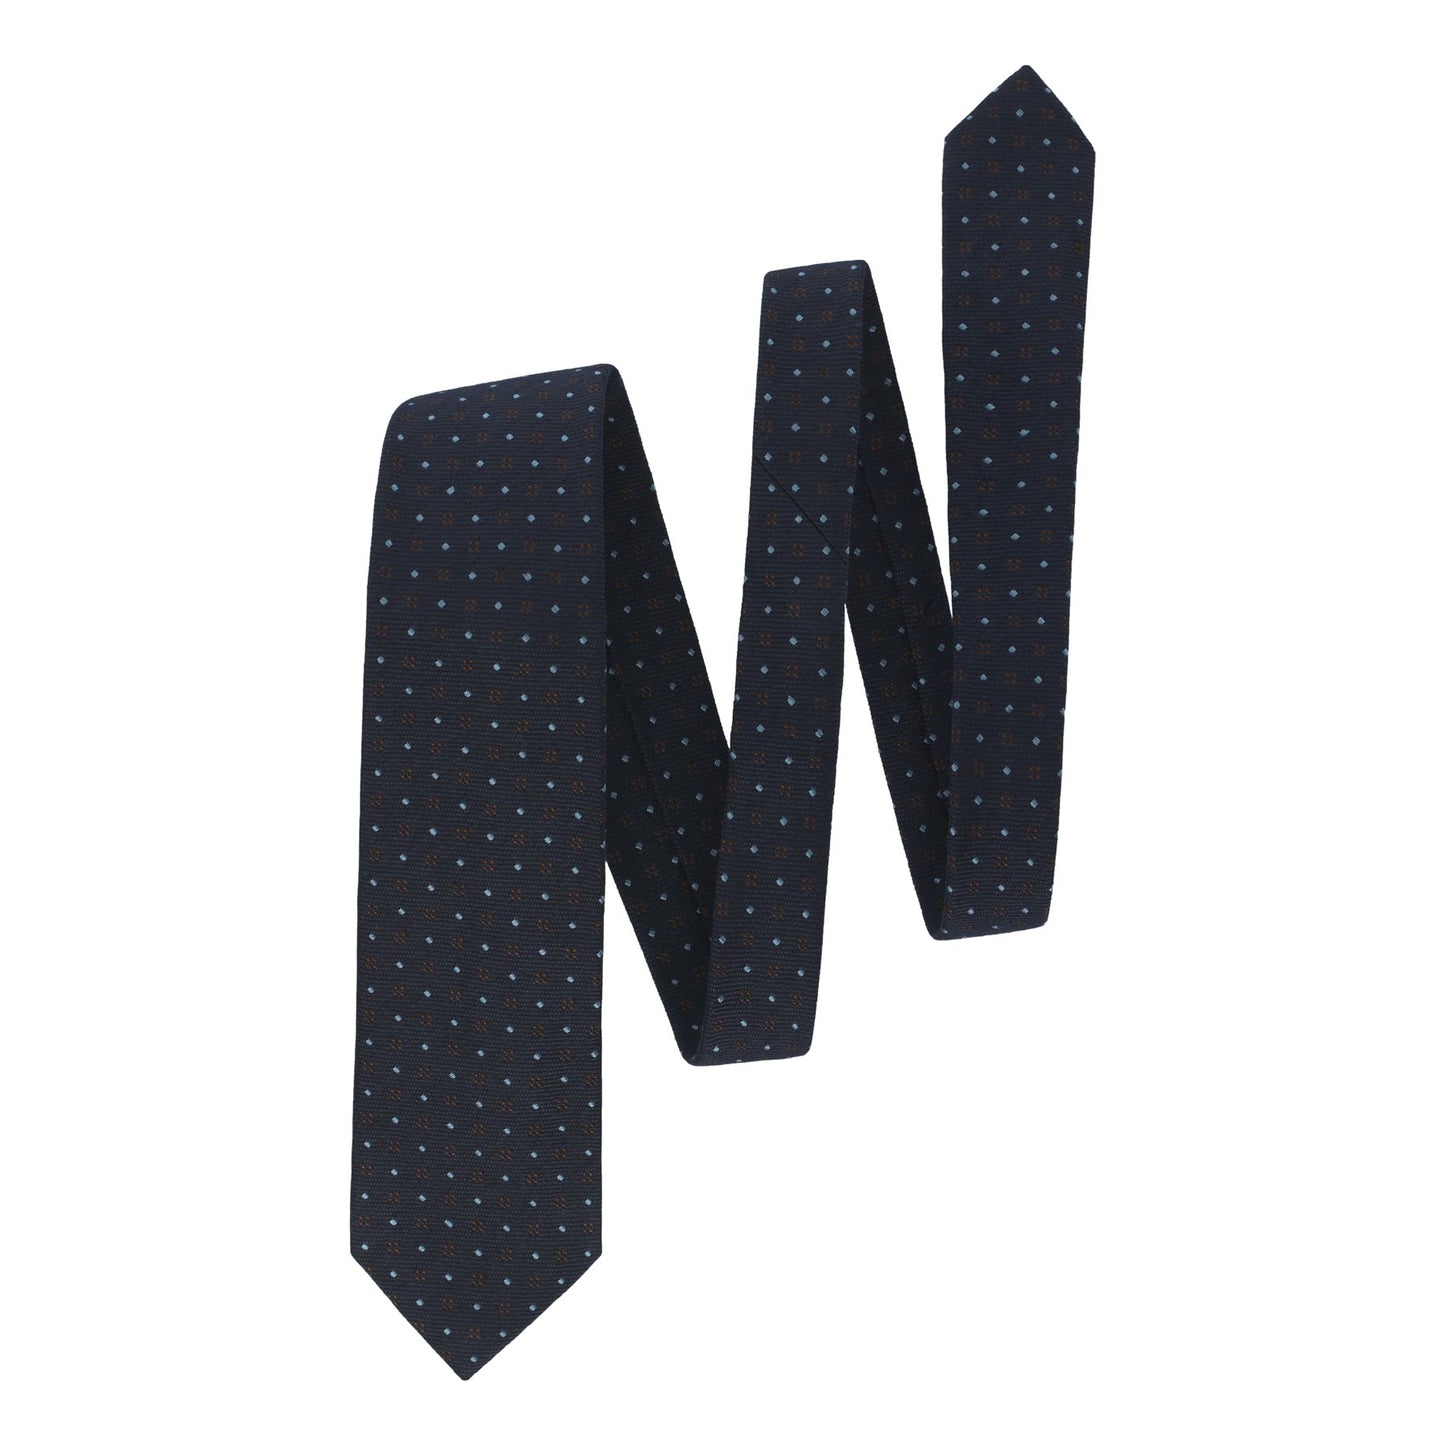 Drake's Embroidered Jacquard Silk Tie in Navy Blue with Pattern - SARTALE